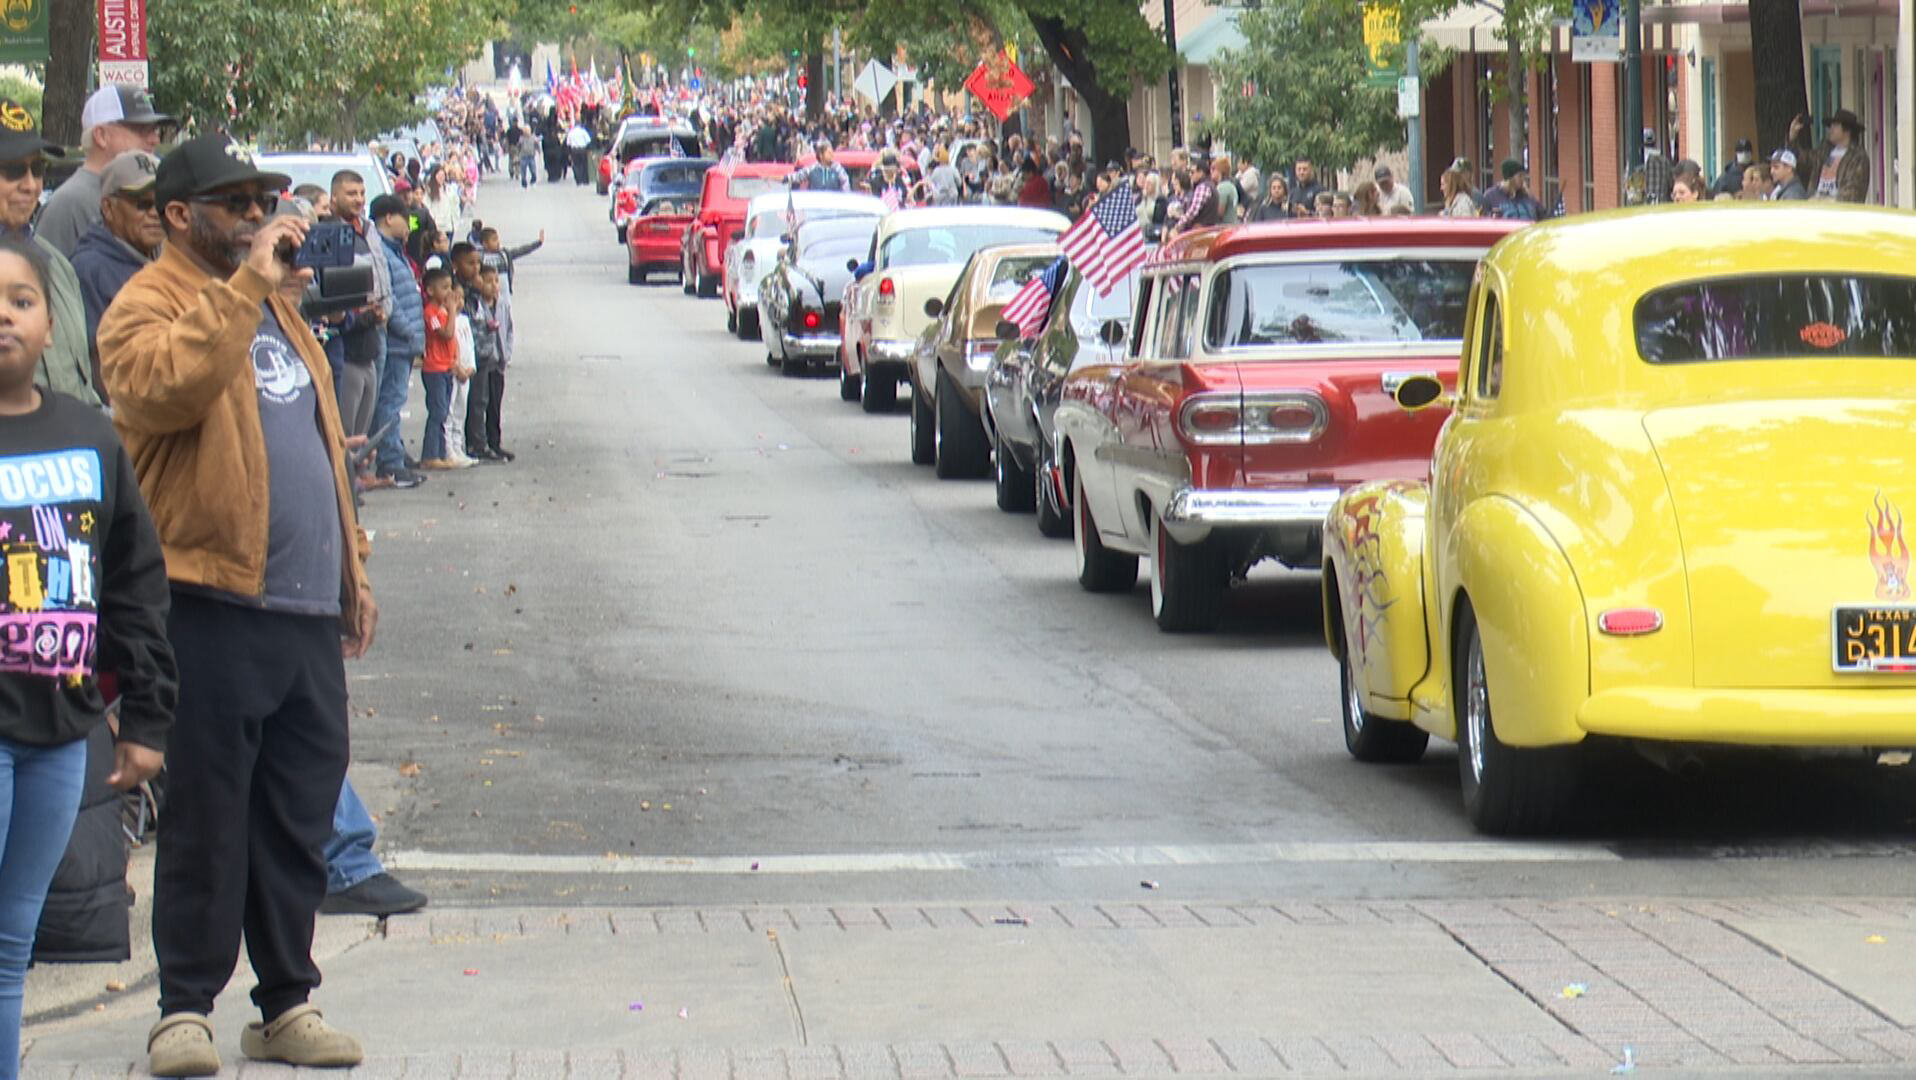 Thousands attend Waco Veterans Day Parade on its 100th year anniversary